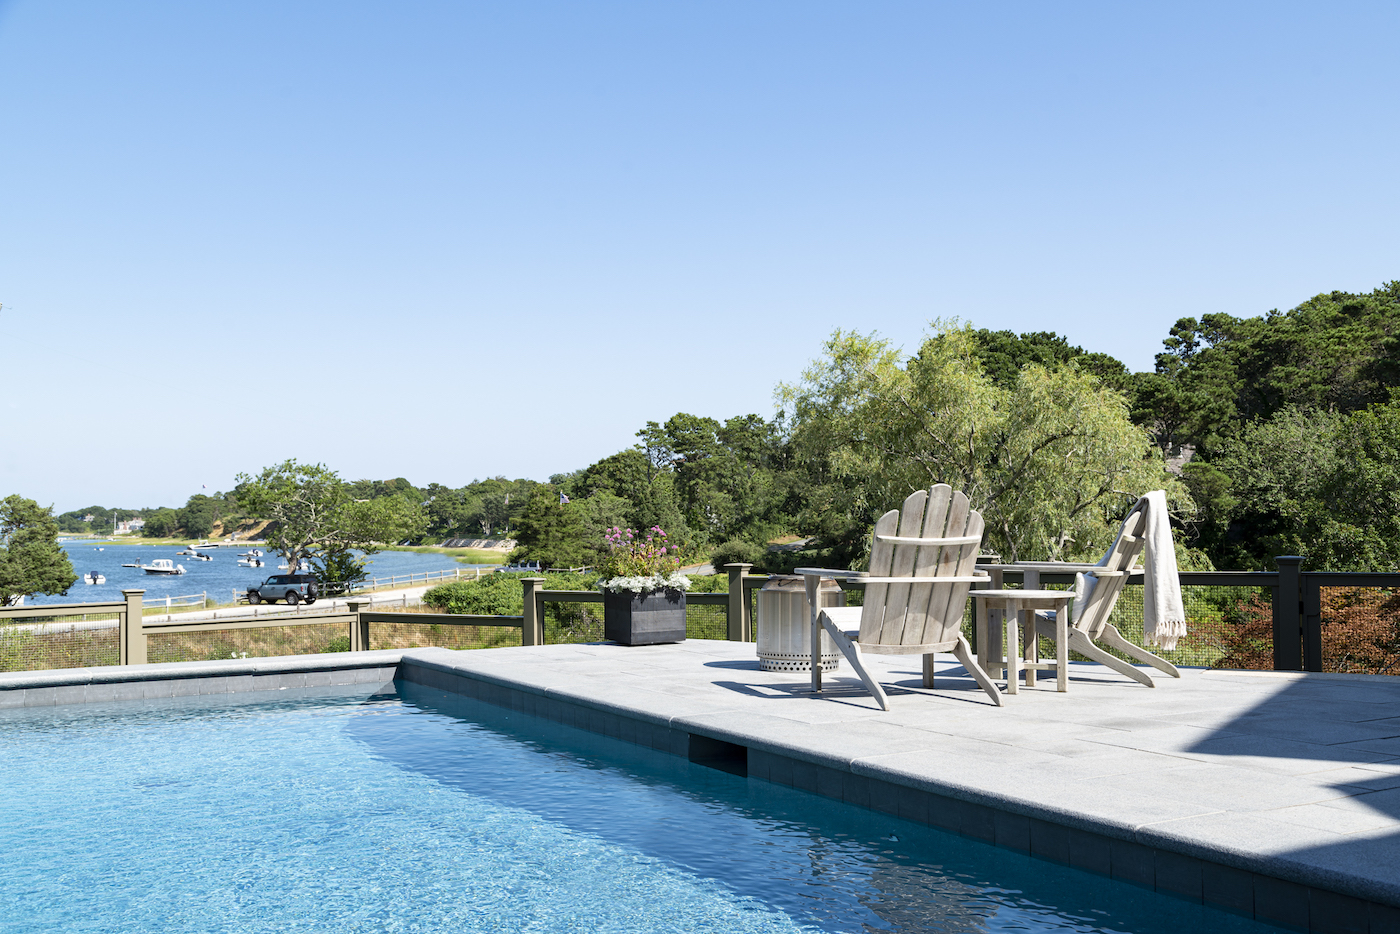 Archwright Builders, Grattan Imaging, Crows Pond Pool